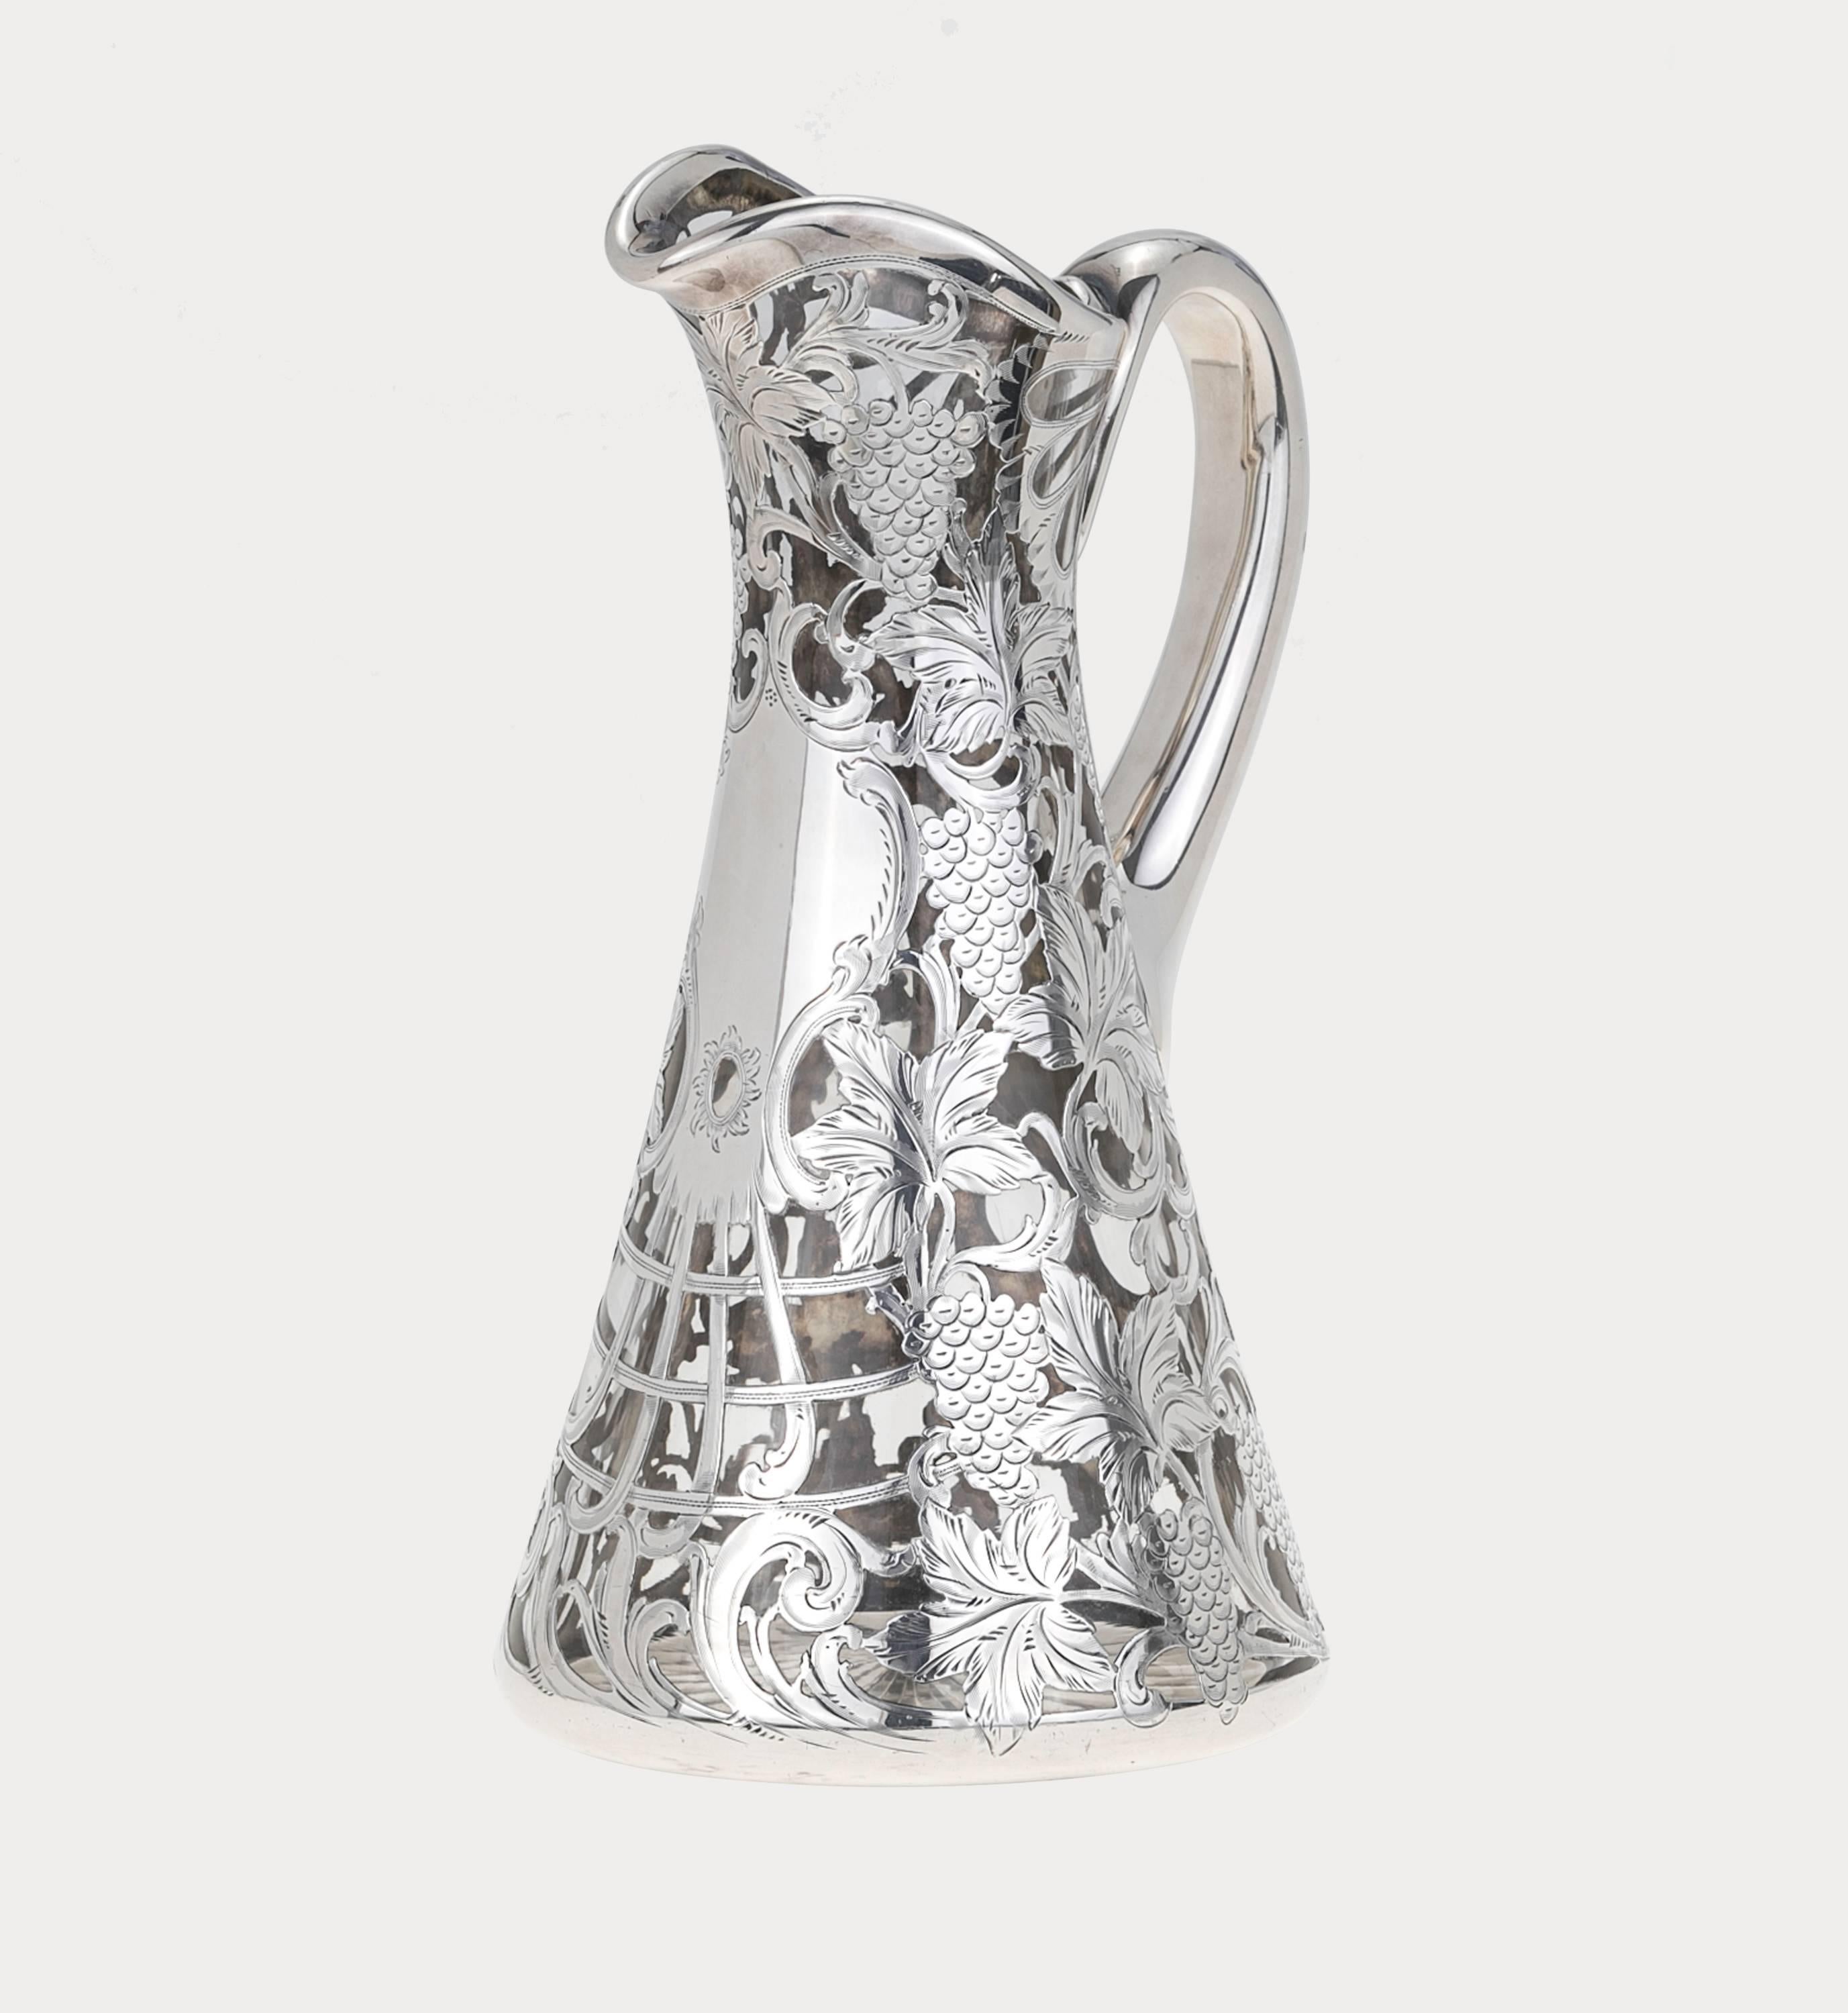 Beautifully etched heavy thick sterling silver overlay in vine grape design on crystal glass pitcher, circa 1900s. Highly decorative, perfect as claret jug. Hallmarked below the handle. Alvin Manufacturing co. 
Patent 3802 999/1000.